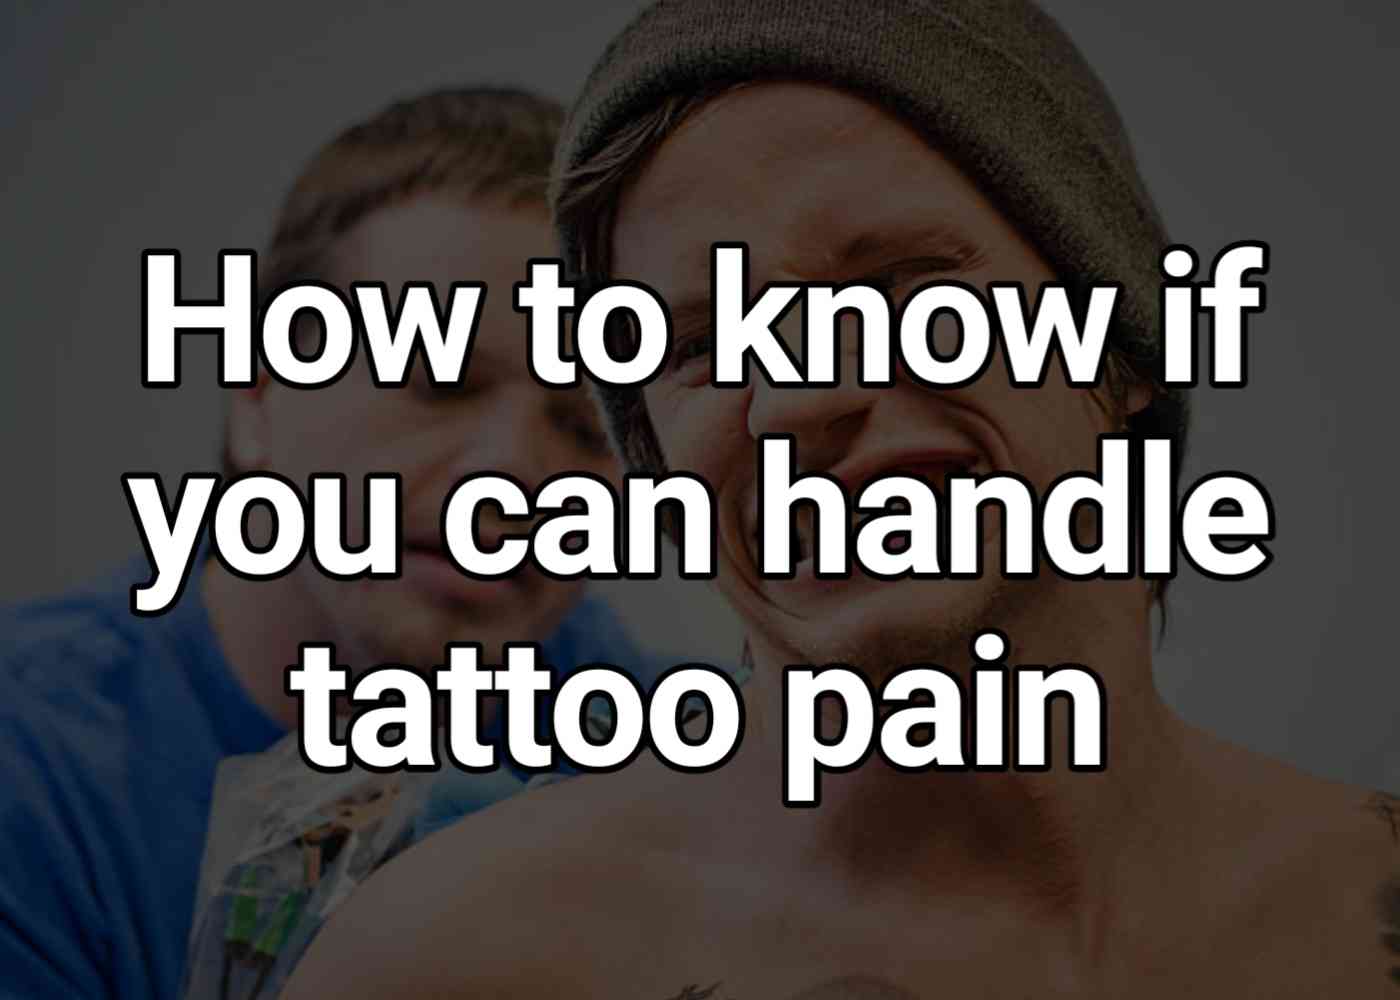 How to know if you can handle tattoo pain